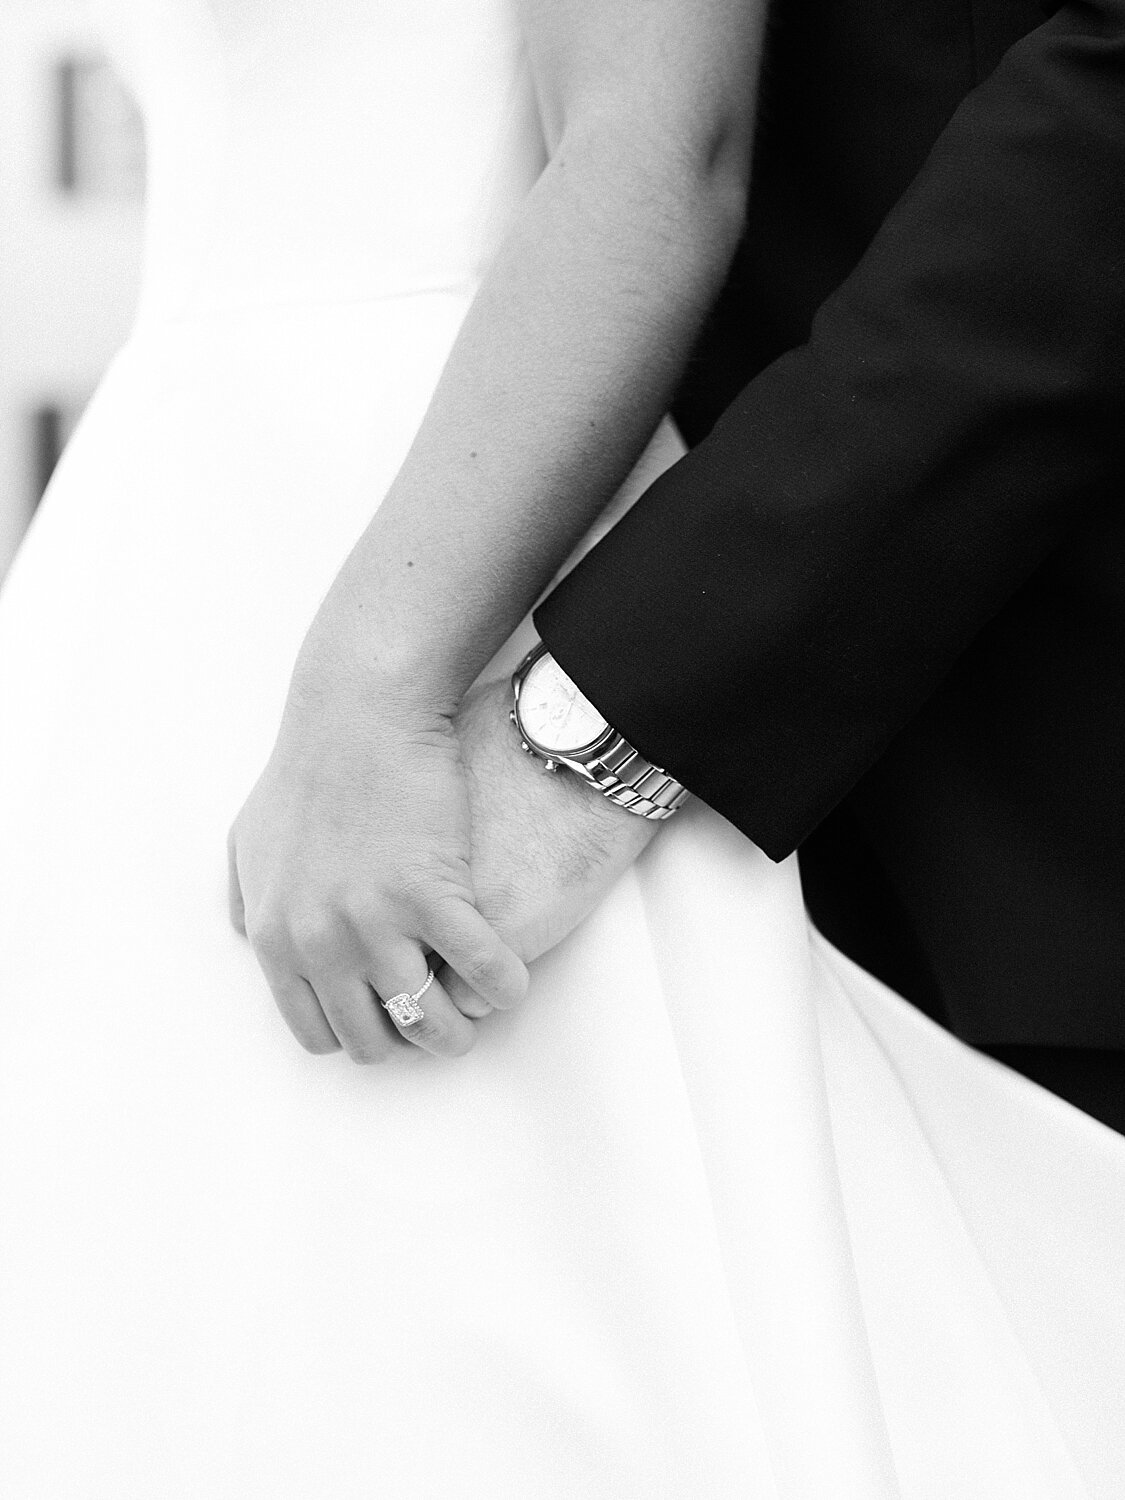 black and white wedding photography by Asher Gardner Photography